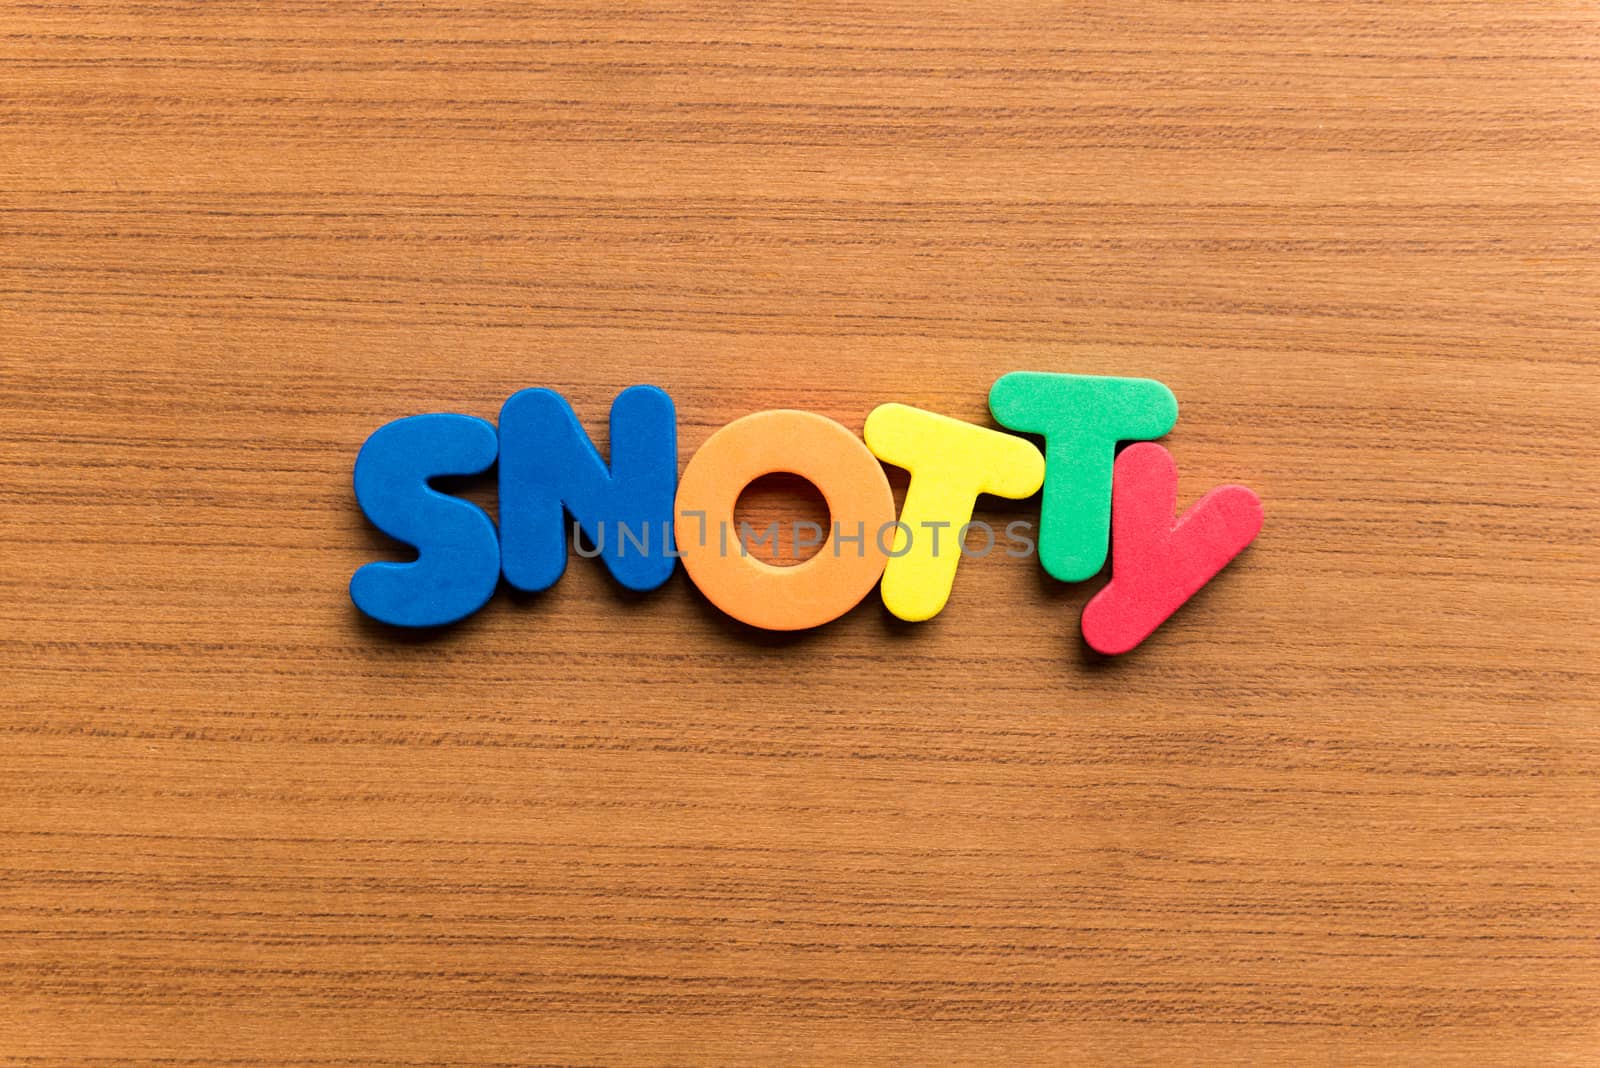 snotty colorful word on the wooden background